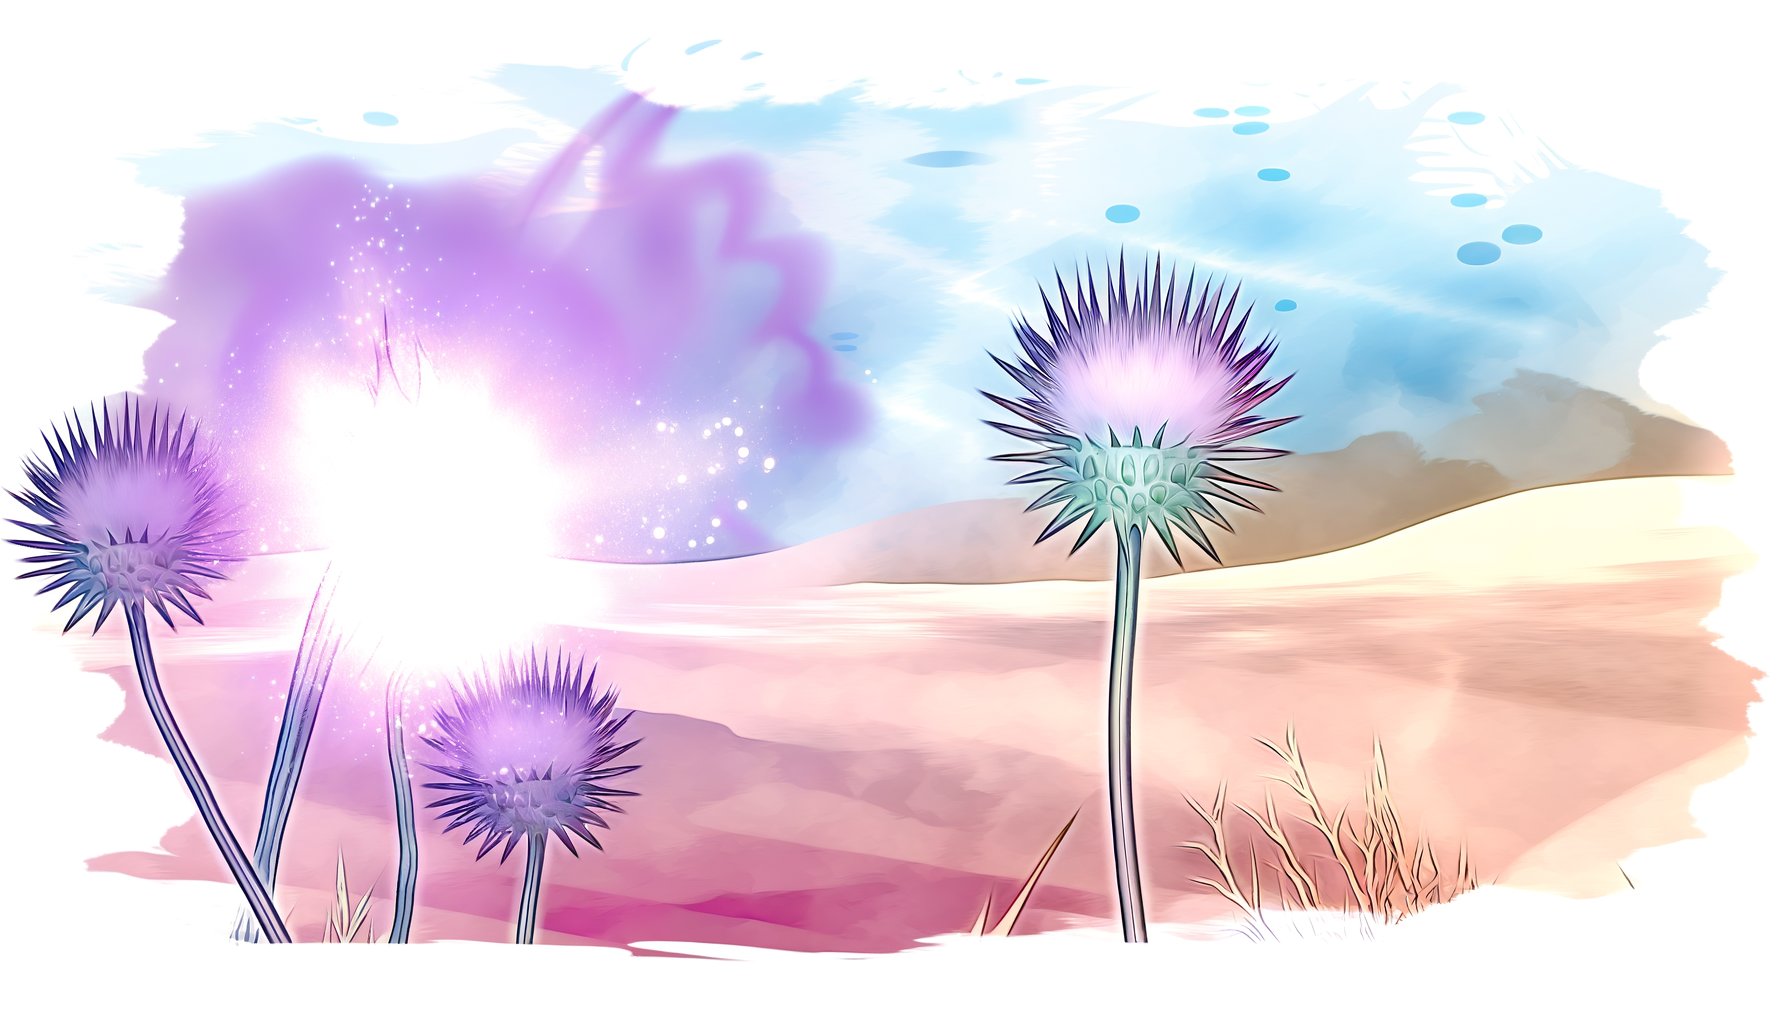 Thistle Whimsy and the Enchanted Sands of Time